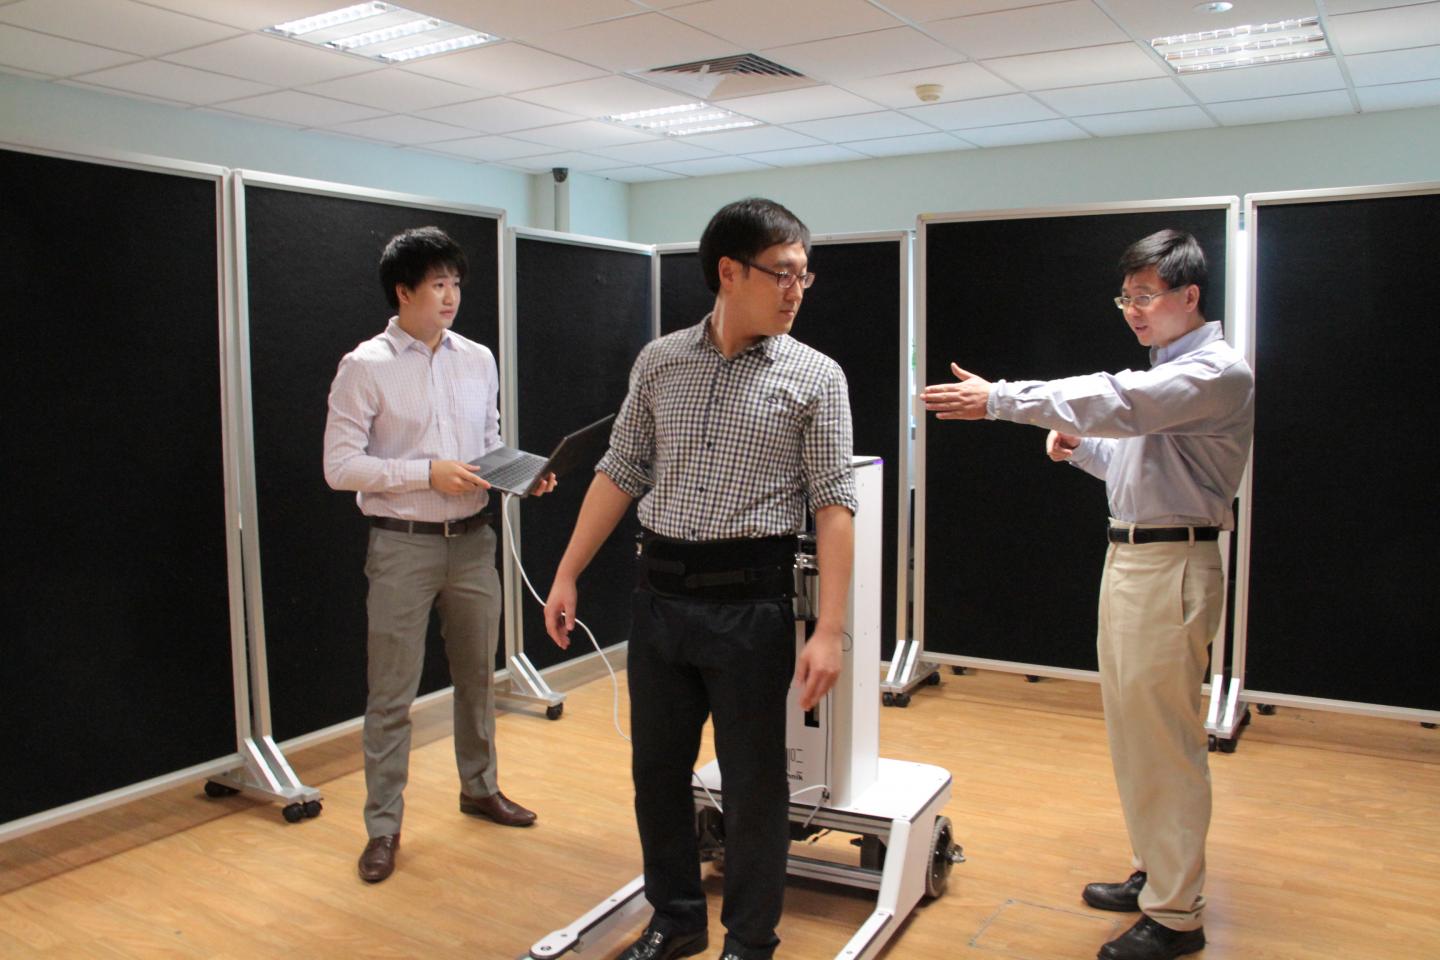 Novel robotic walker invented by NUS researchers helps patients regain natural gait and increases productivity of physiotherapists